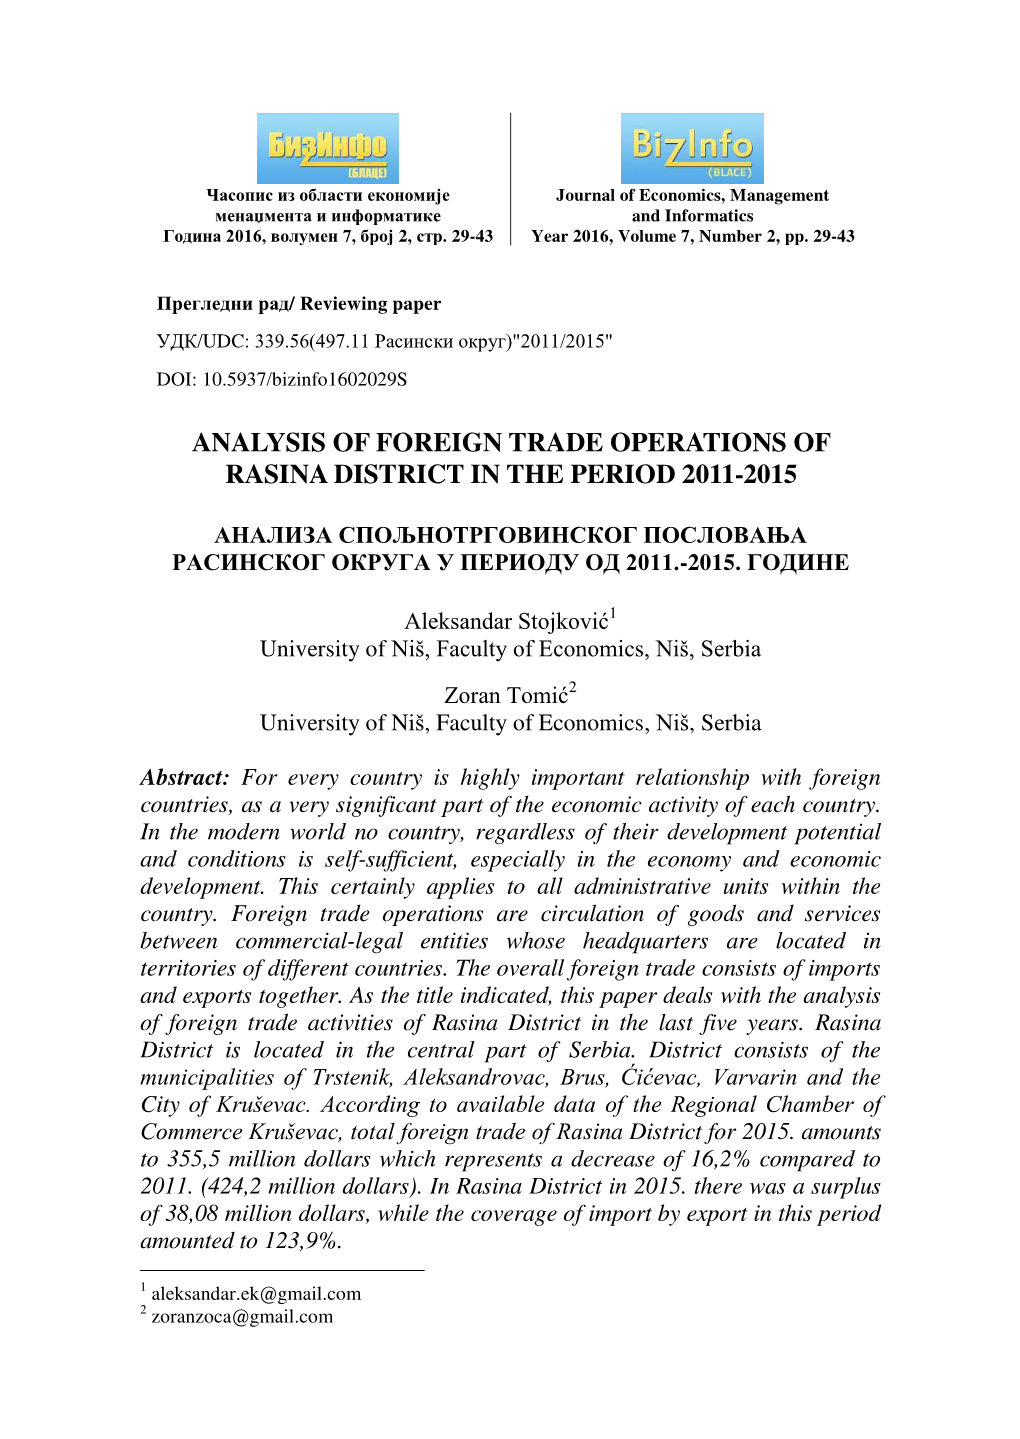 Analysis of Foreign Trade Operations of Rasina District in the Period 2011-2015